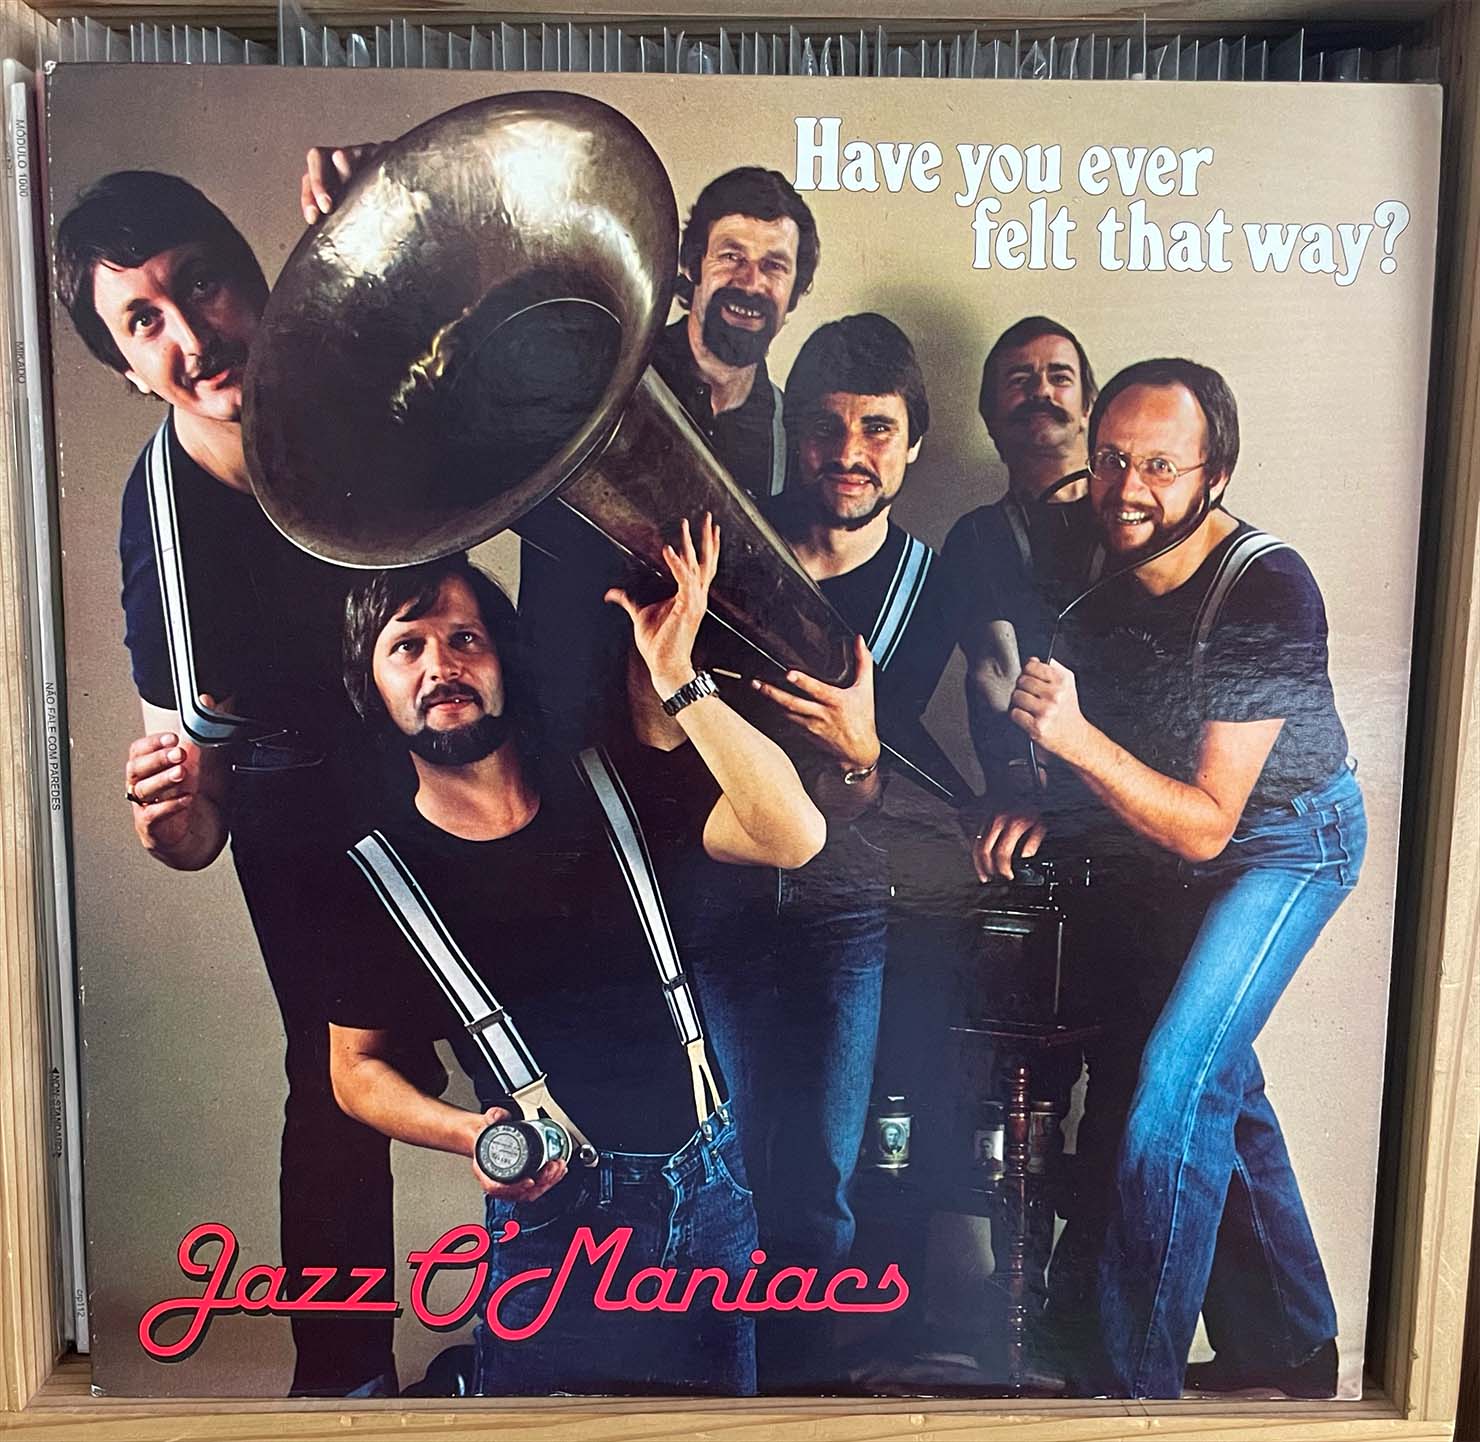 Jazz O'Maniacs『Have You Ever Felt That Way?』